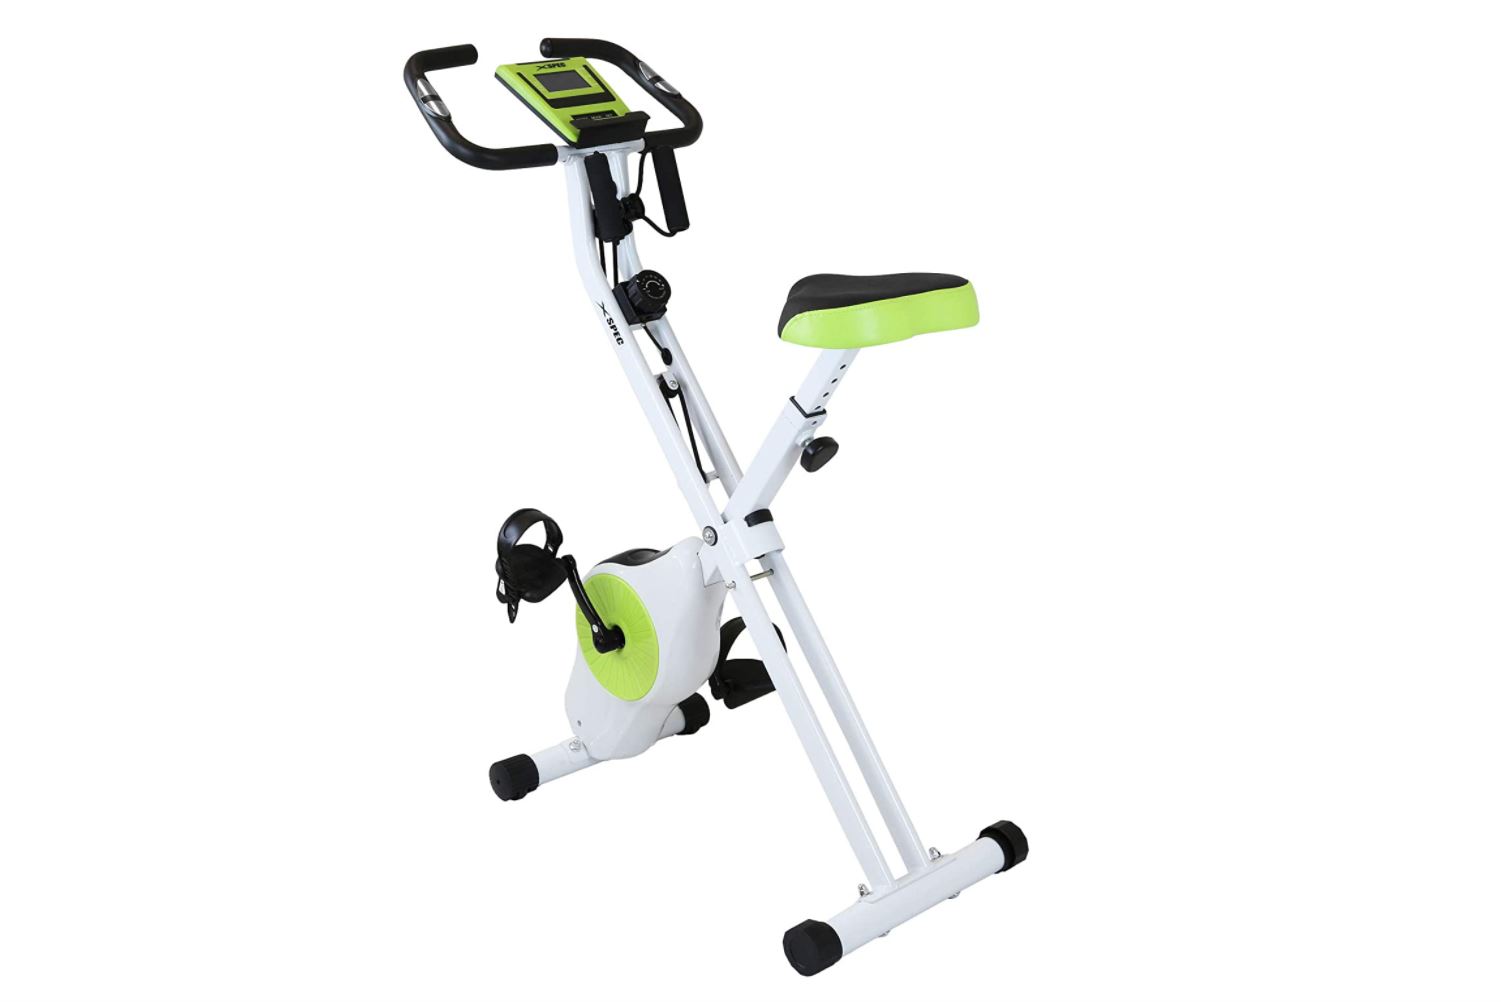 Details about   Cardio Folding Exercise Bike Fitness Workout Home Indoor Gym Trainer Ultra-quiet 